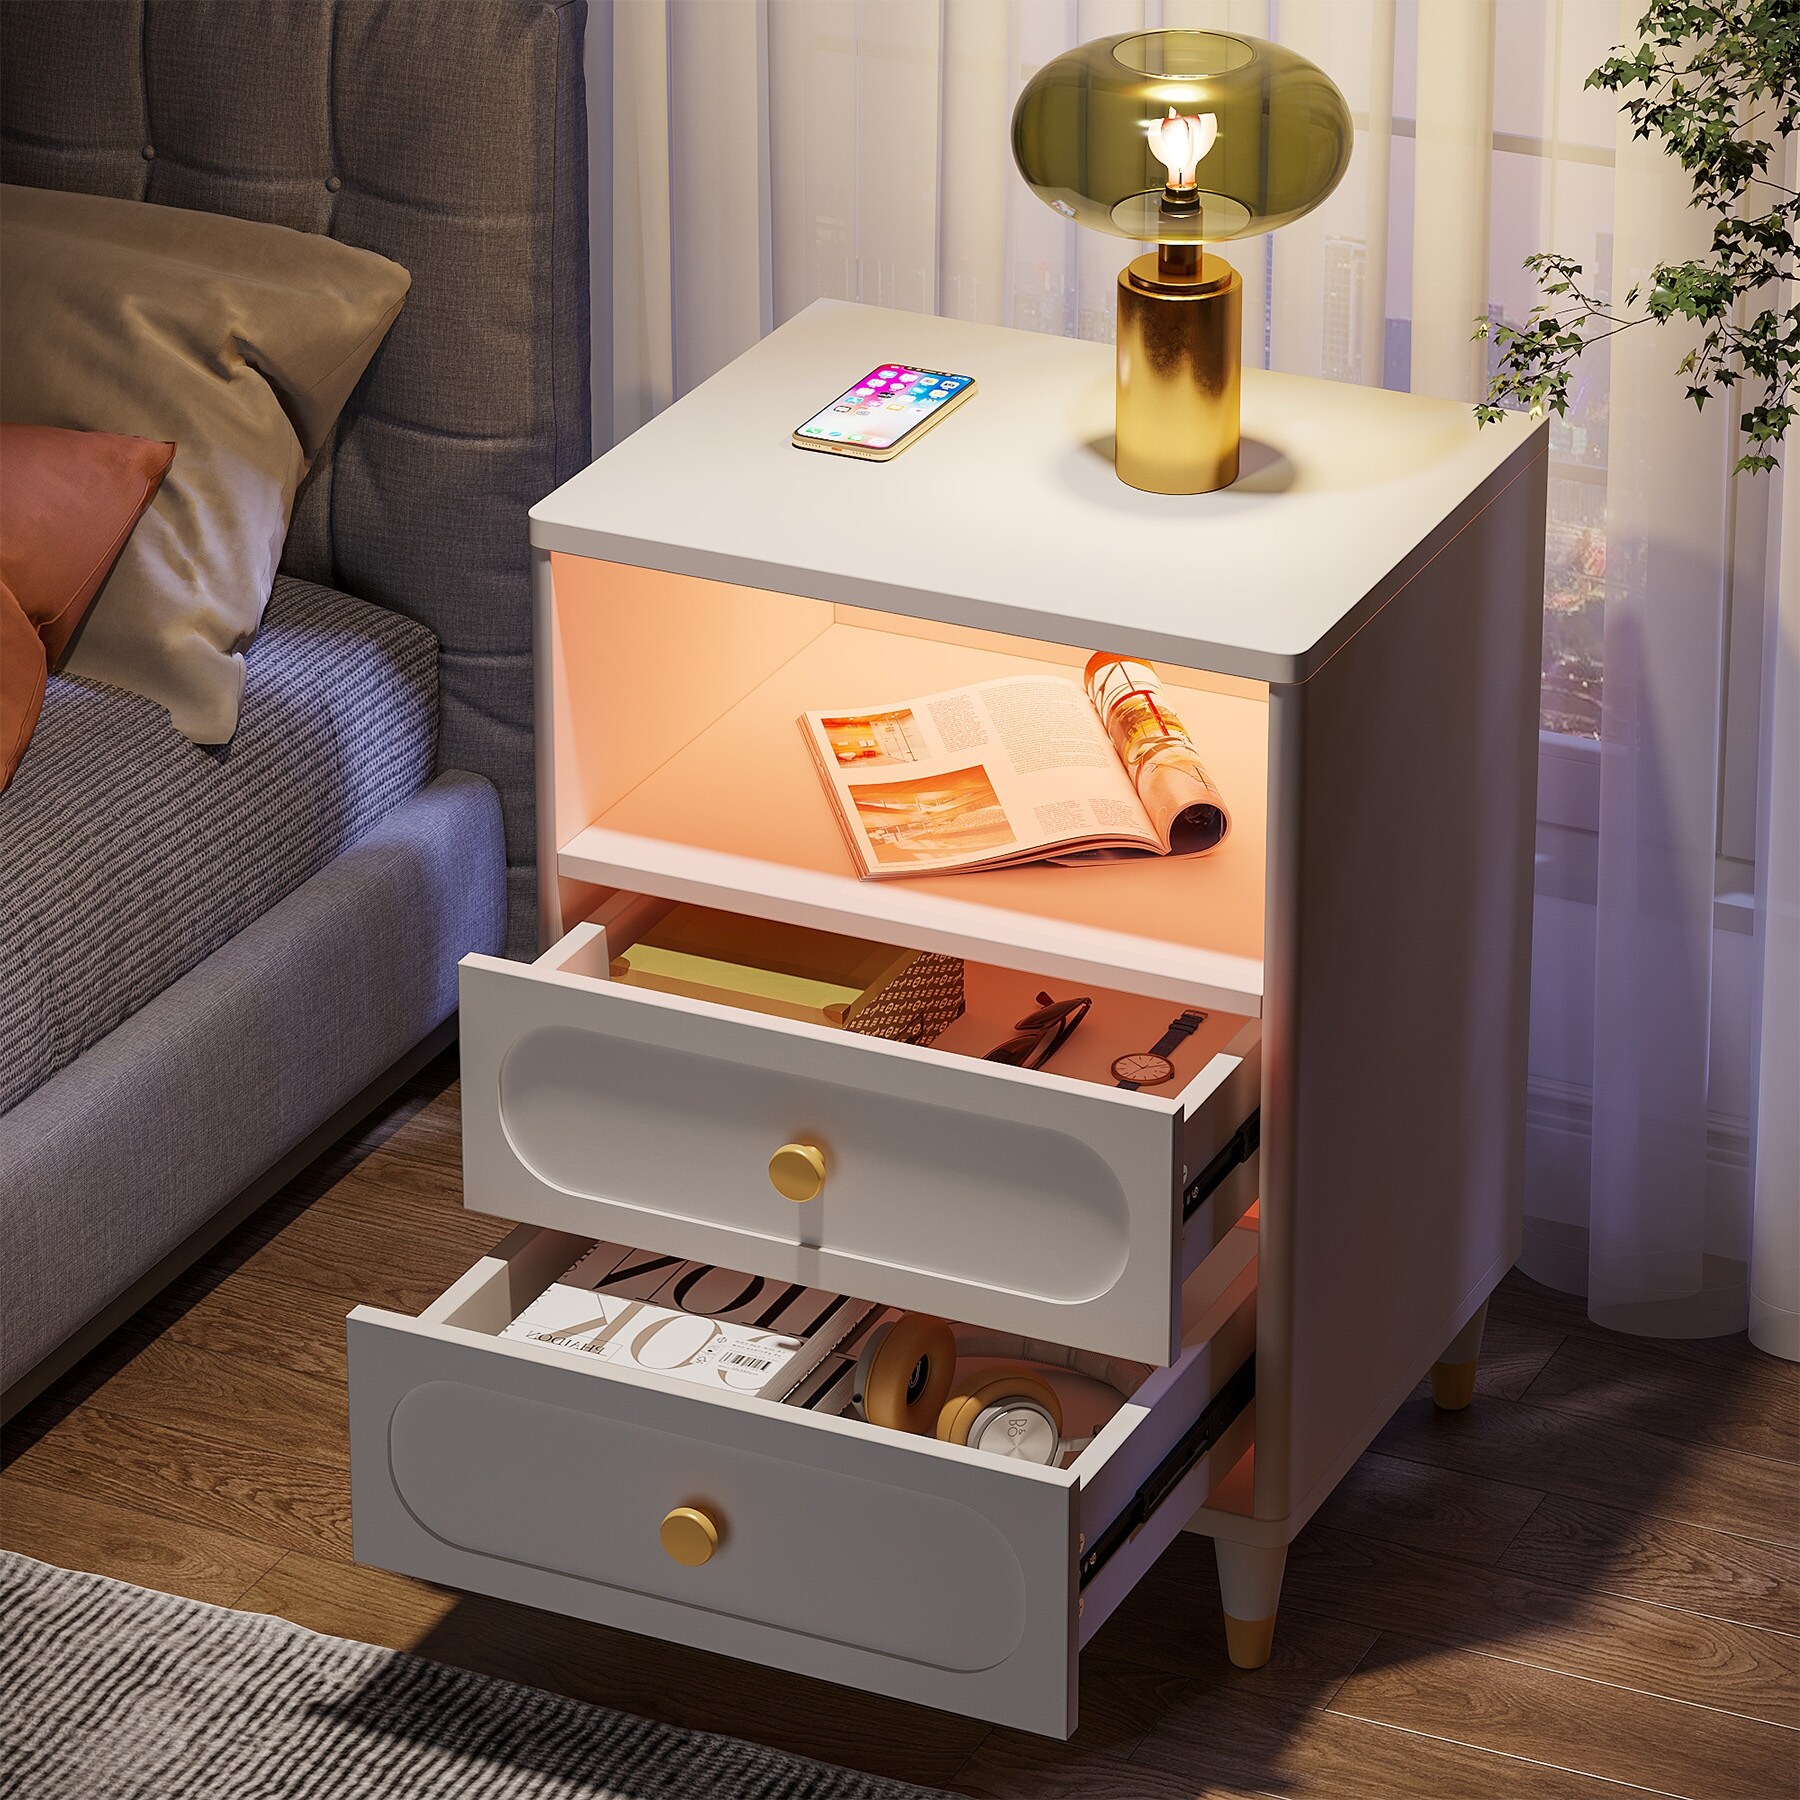 LED Nightstand, 2-Drawer Nightstand Bedside table with Shelf